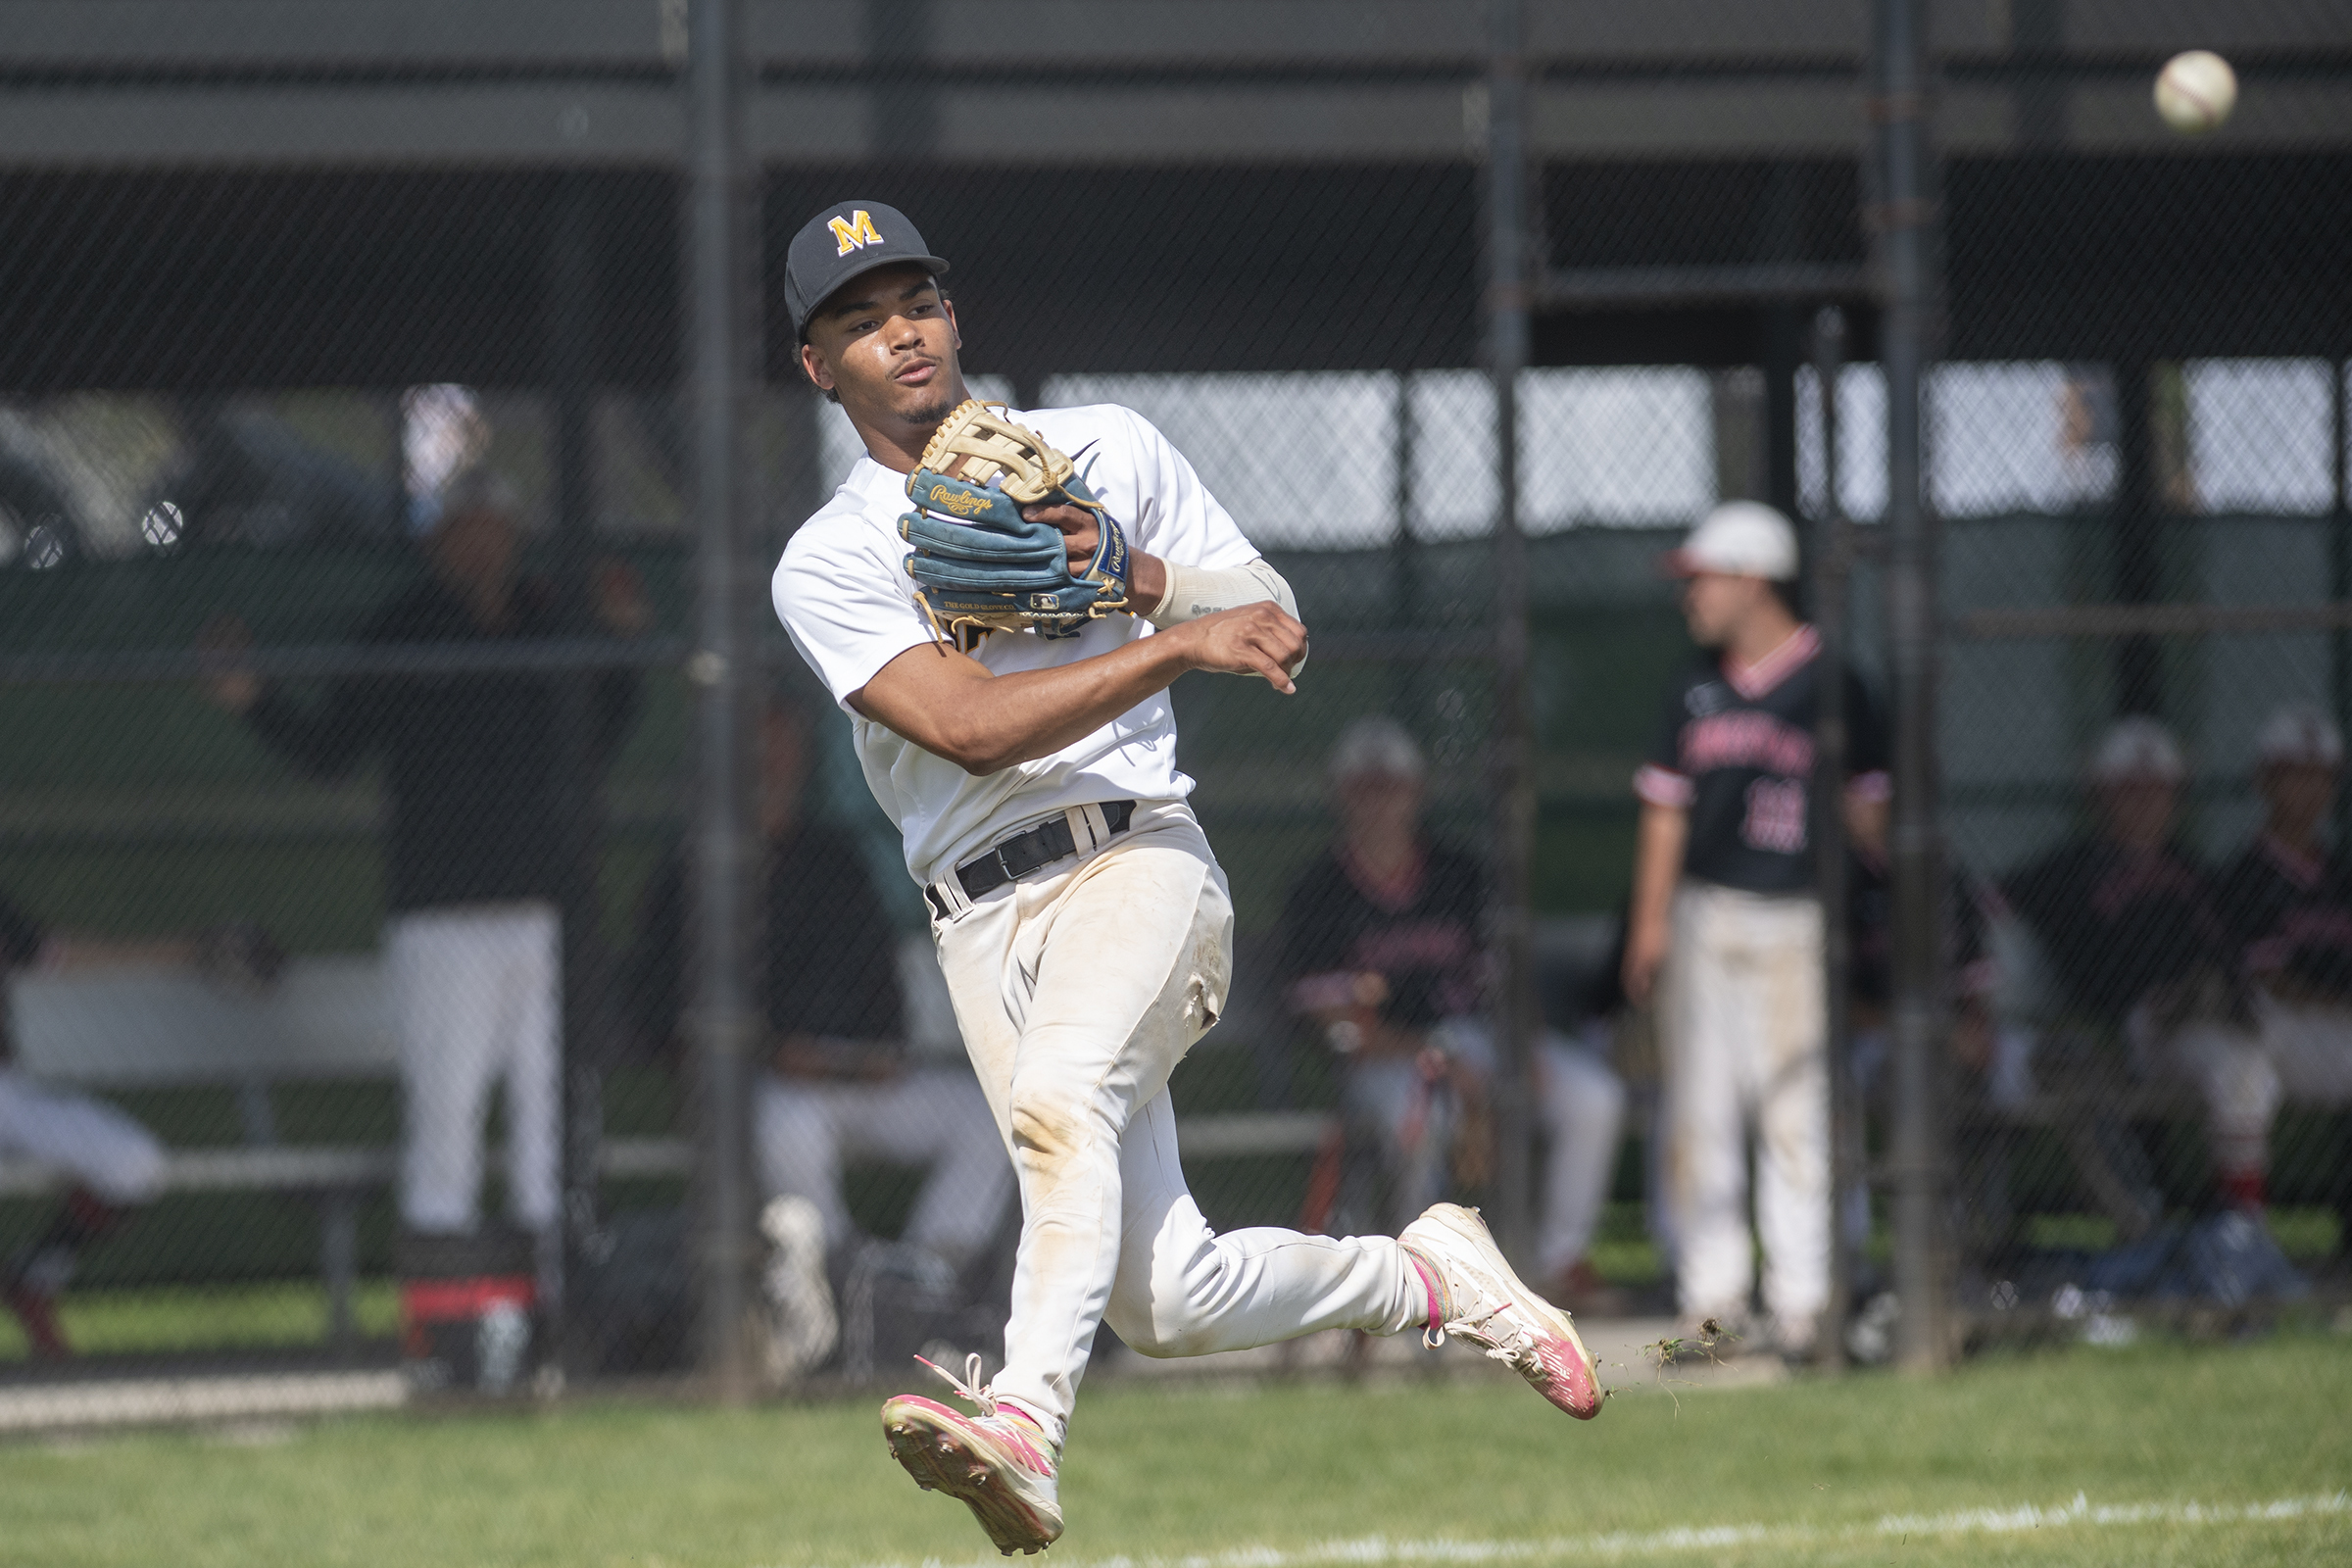 2022 MLB Draft: Martin hits fork in road, announces he'll play at